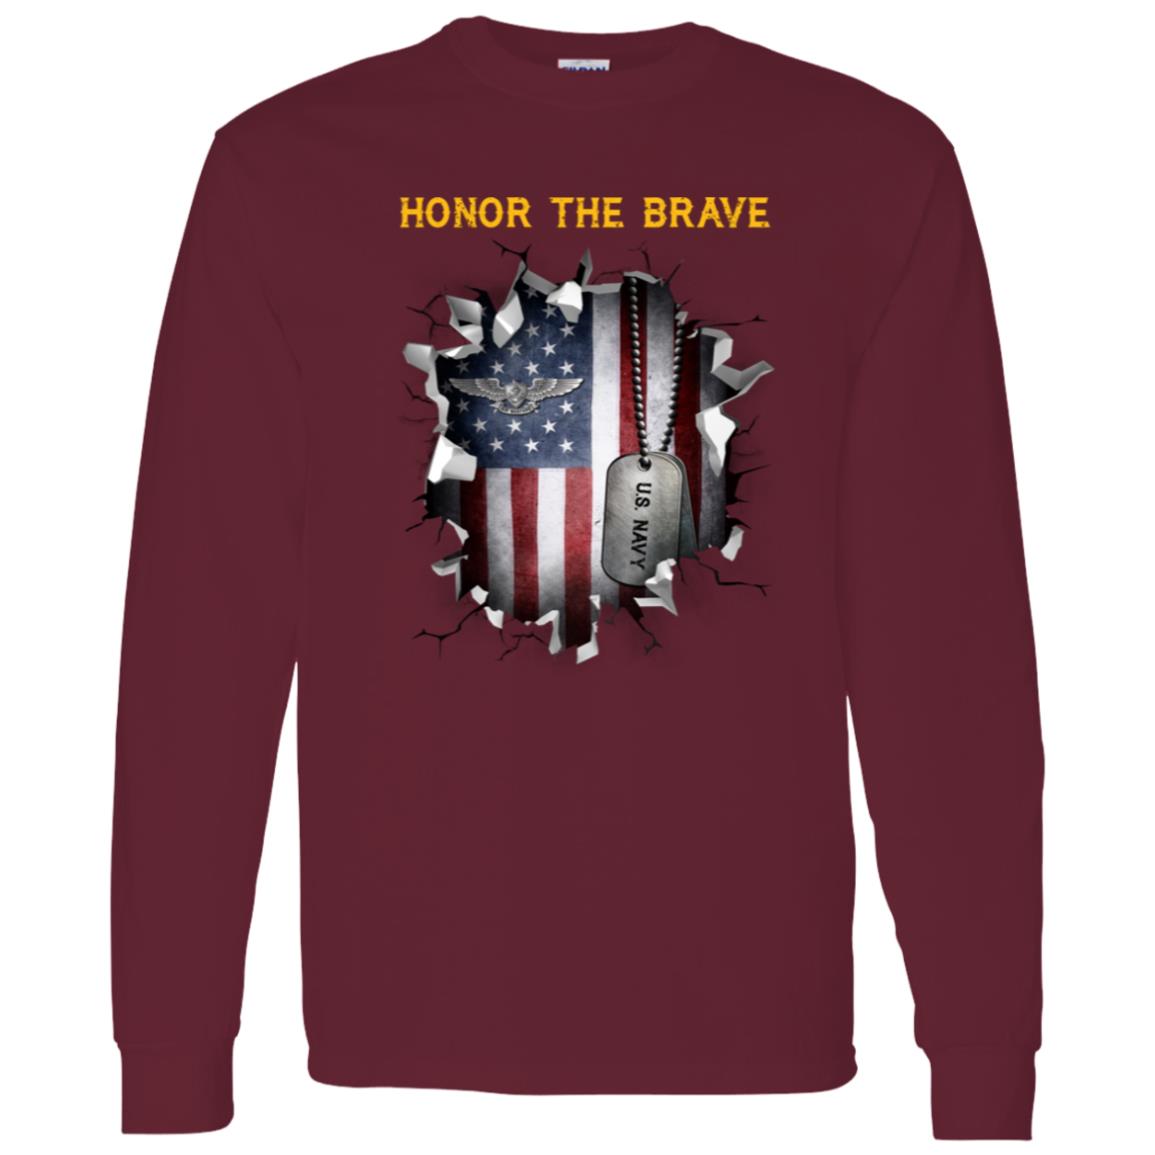 U.S. Navy Enlisted Aviation Warfare Specialist - Honor The Brave Front Shirt